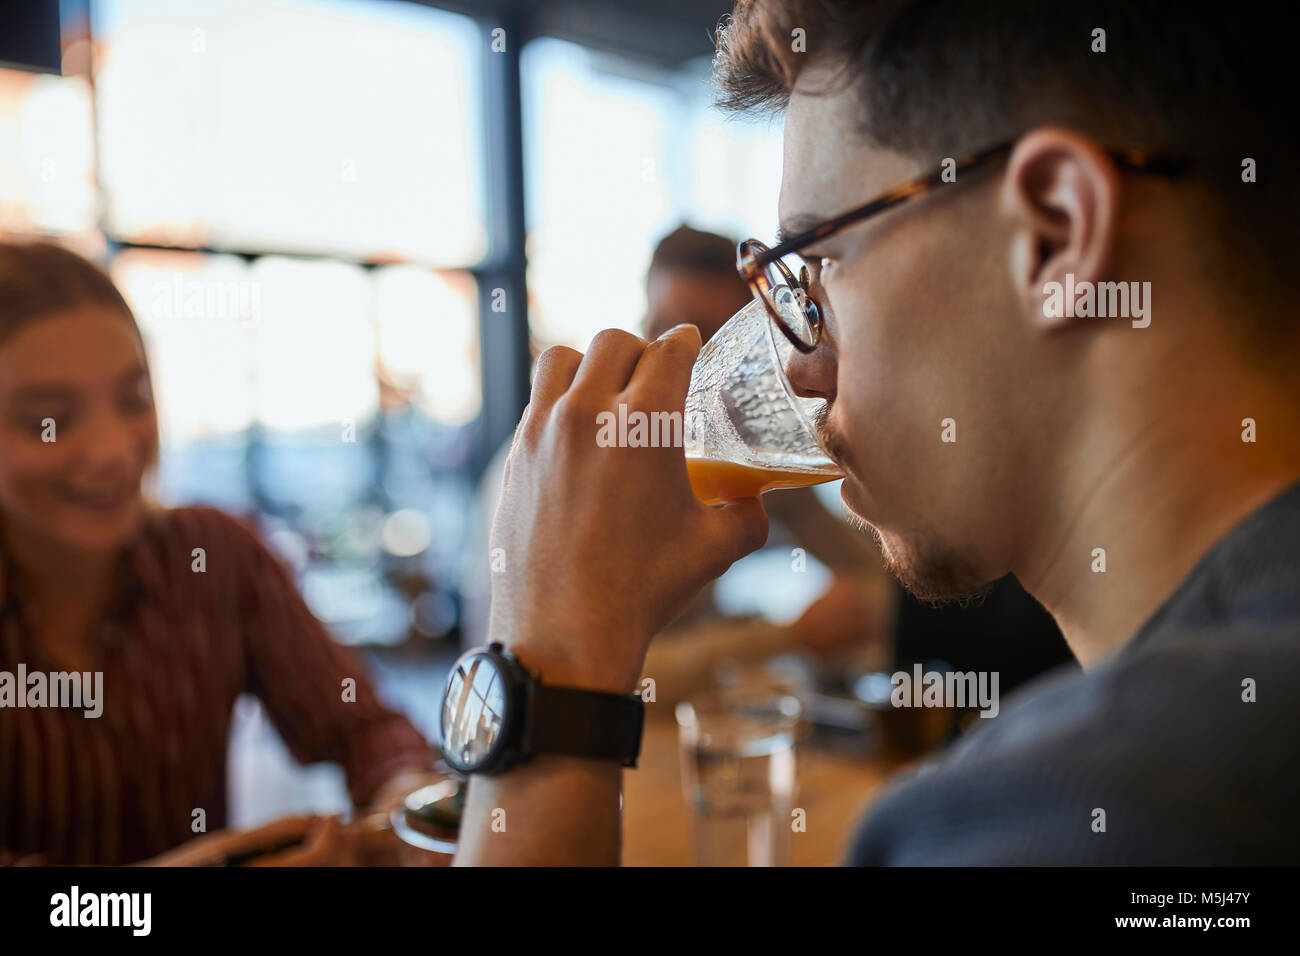 Young man drinking glass of juice in a cafe with friends in background Stock Photo